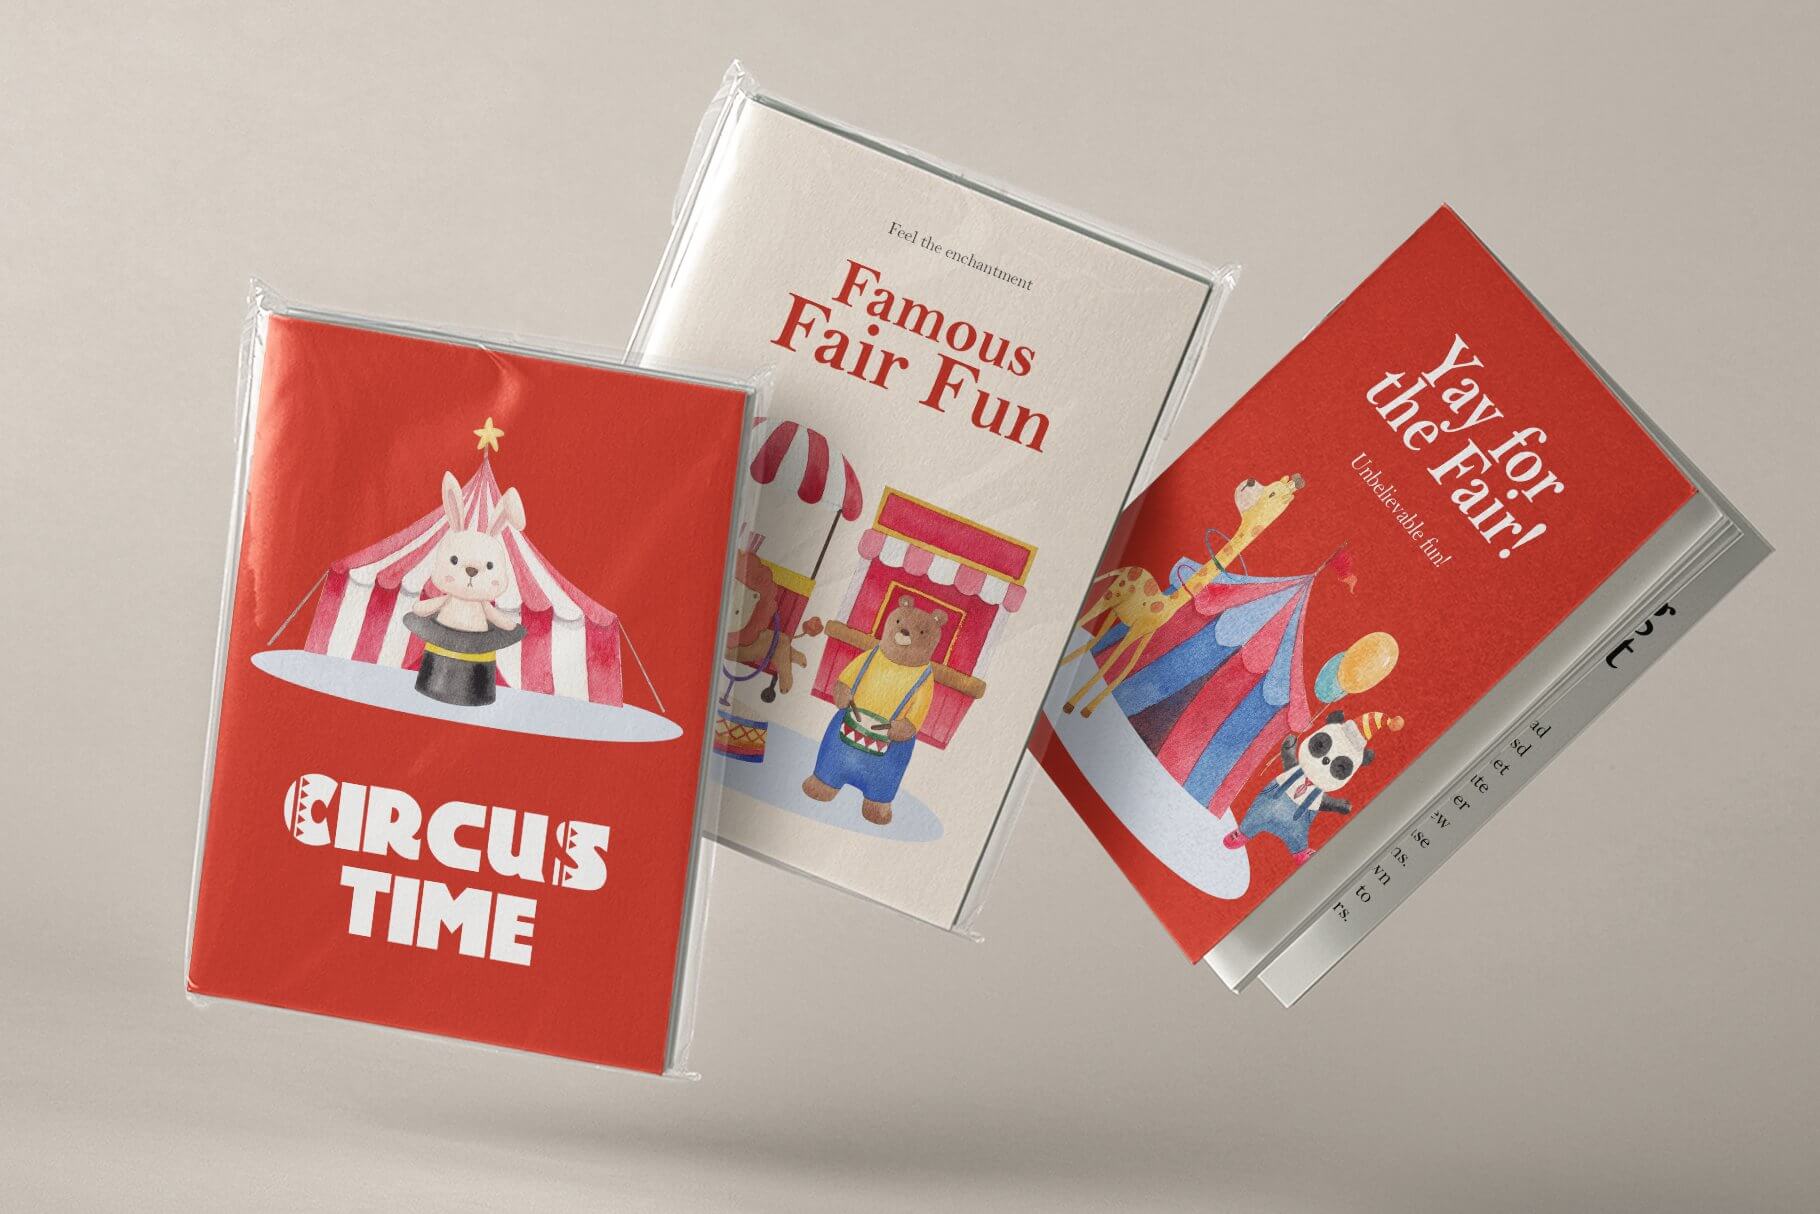 circus and funfair watercolor illustration book cover example.